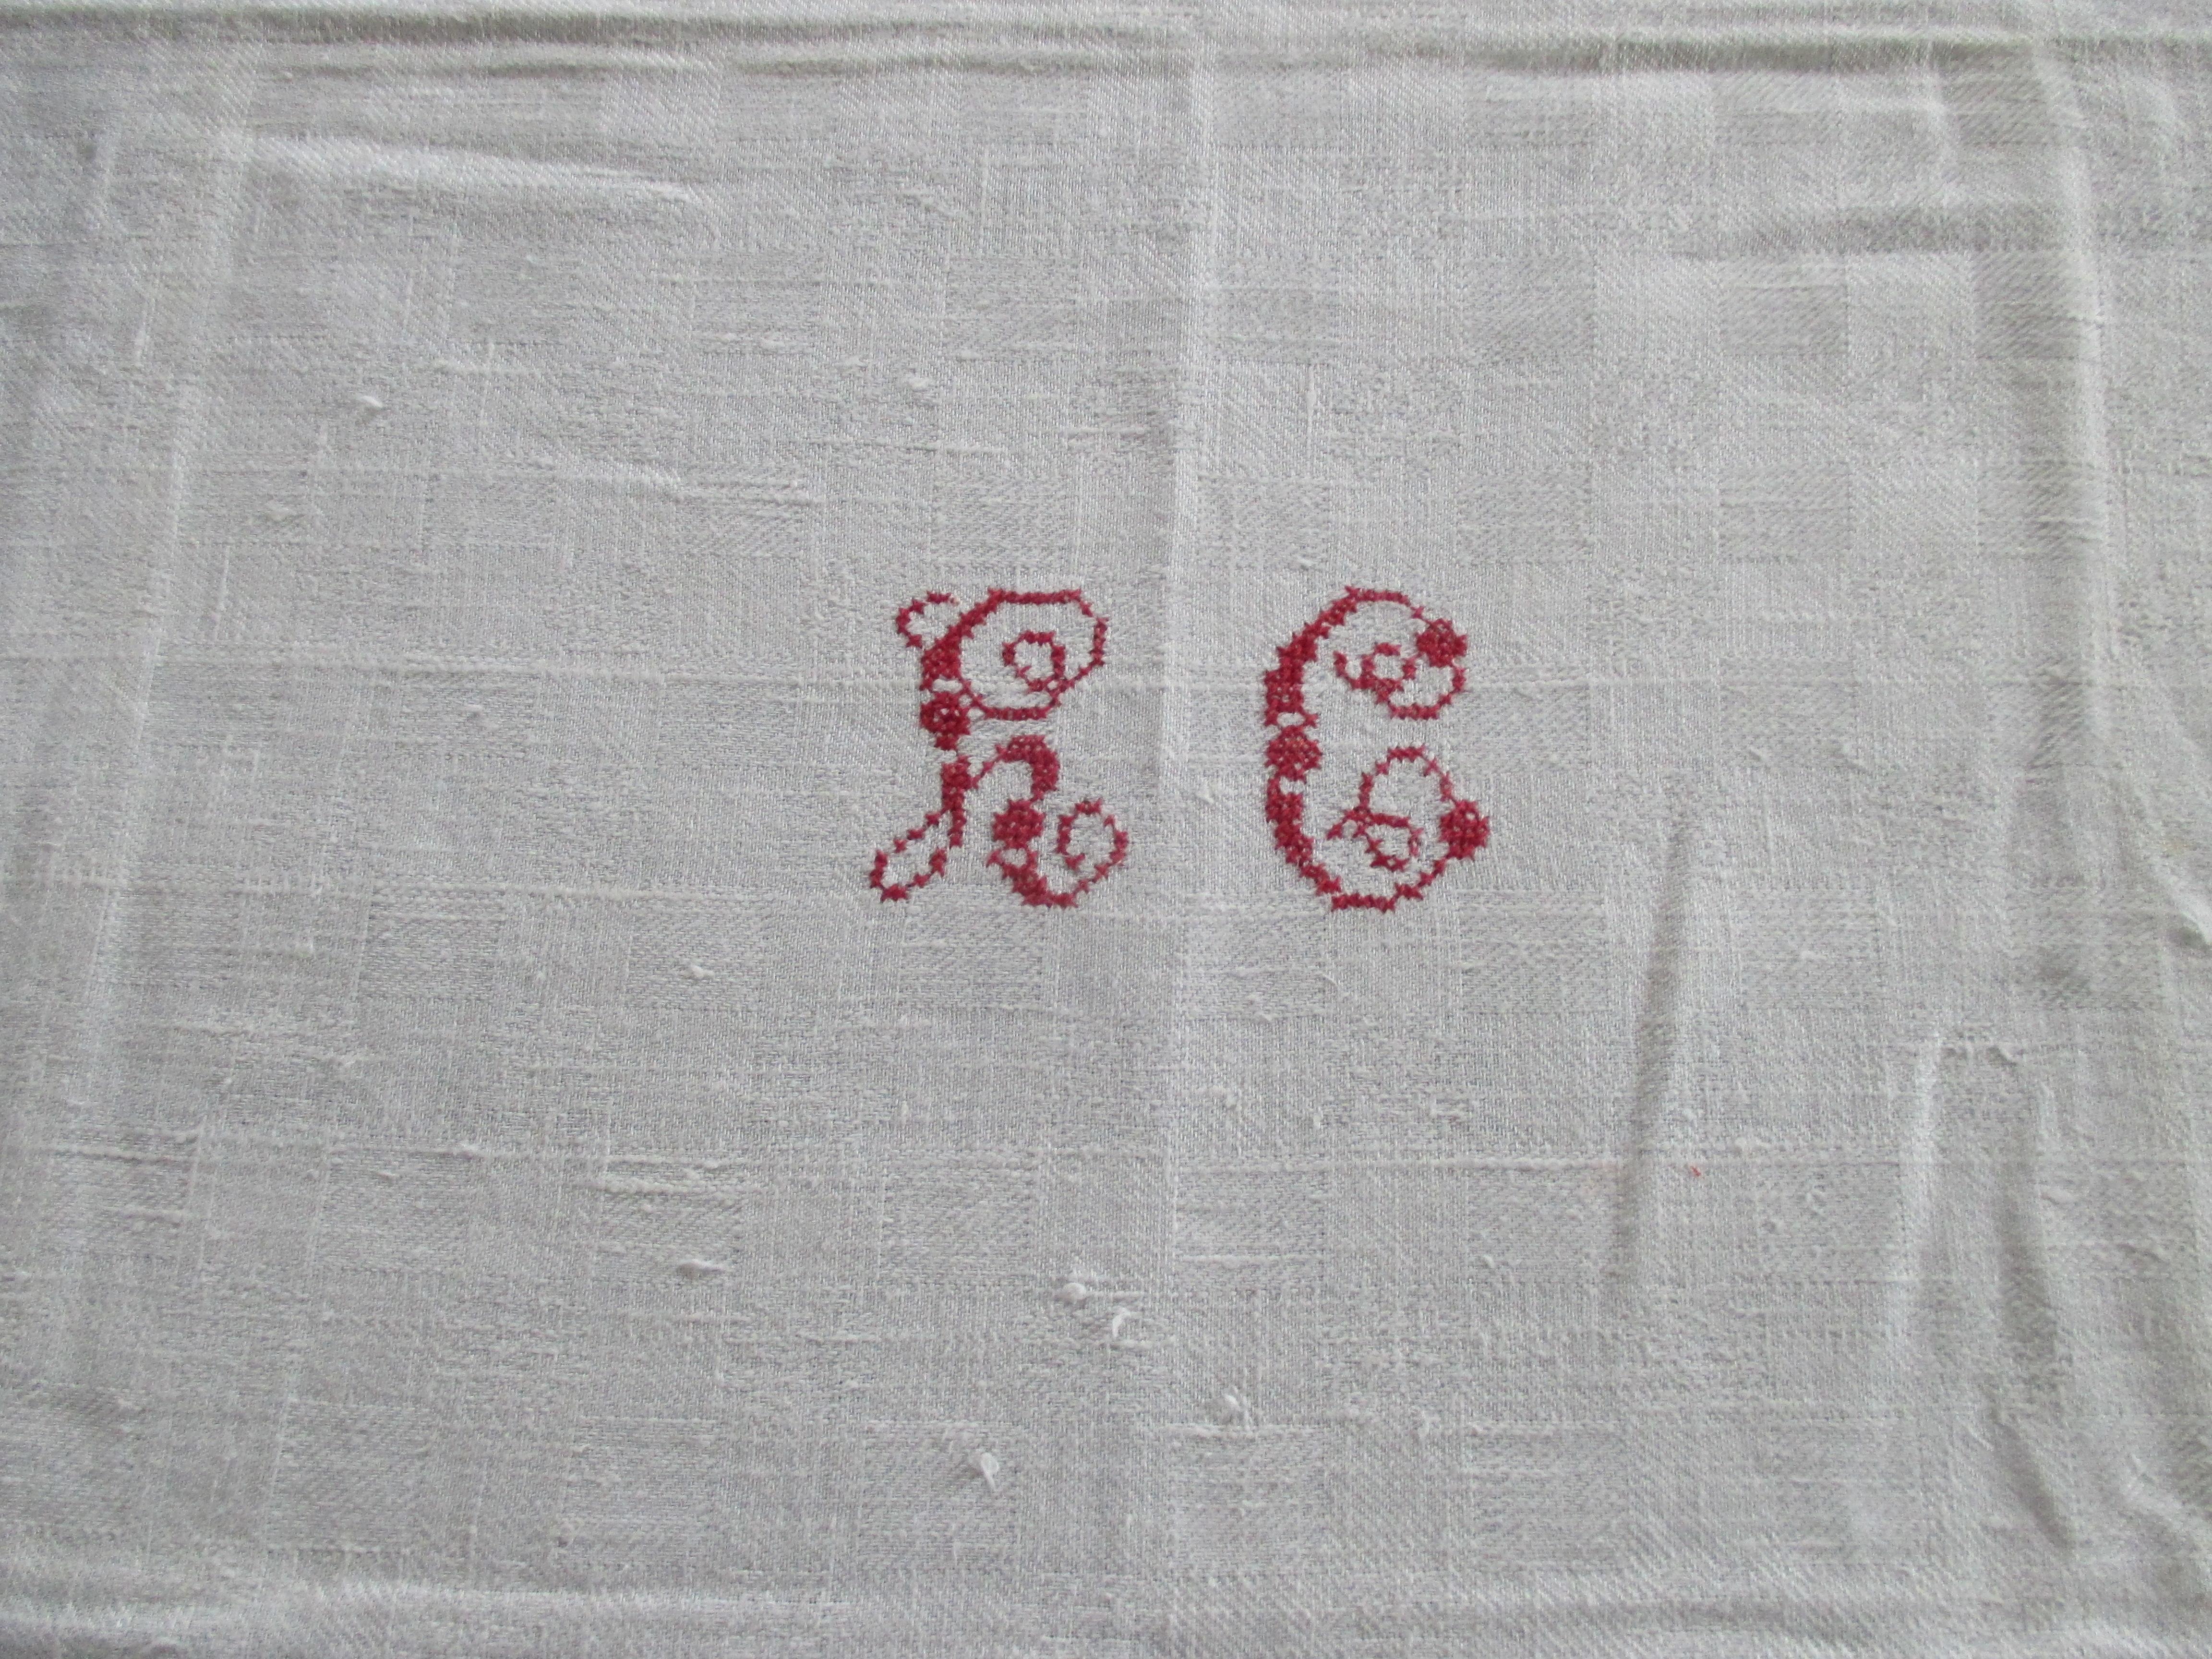 Antique natural linen embroidered textile with red letters 